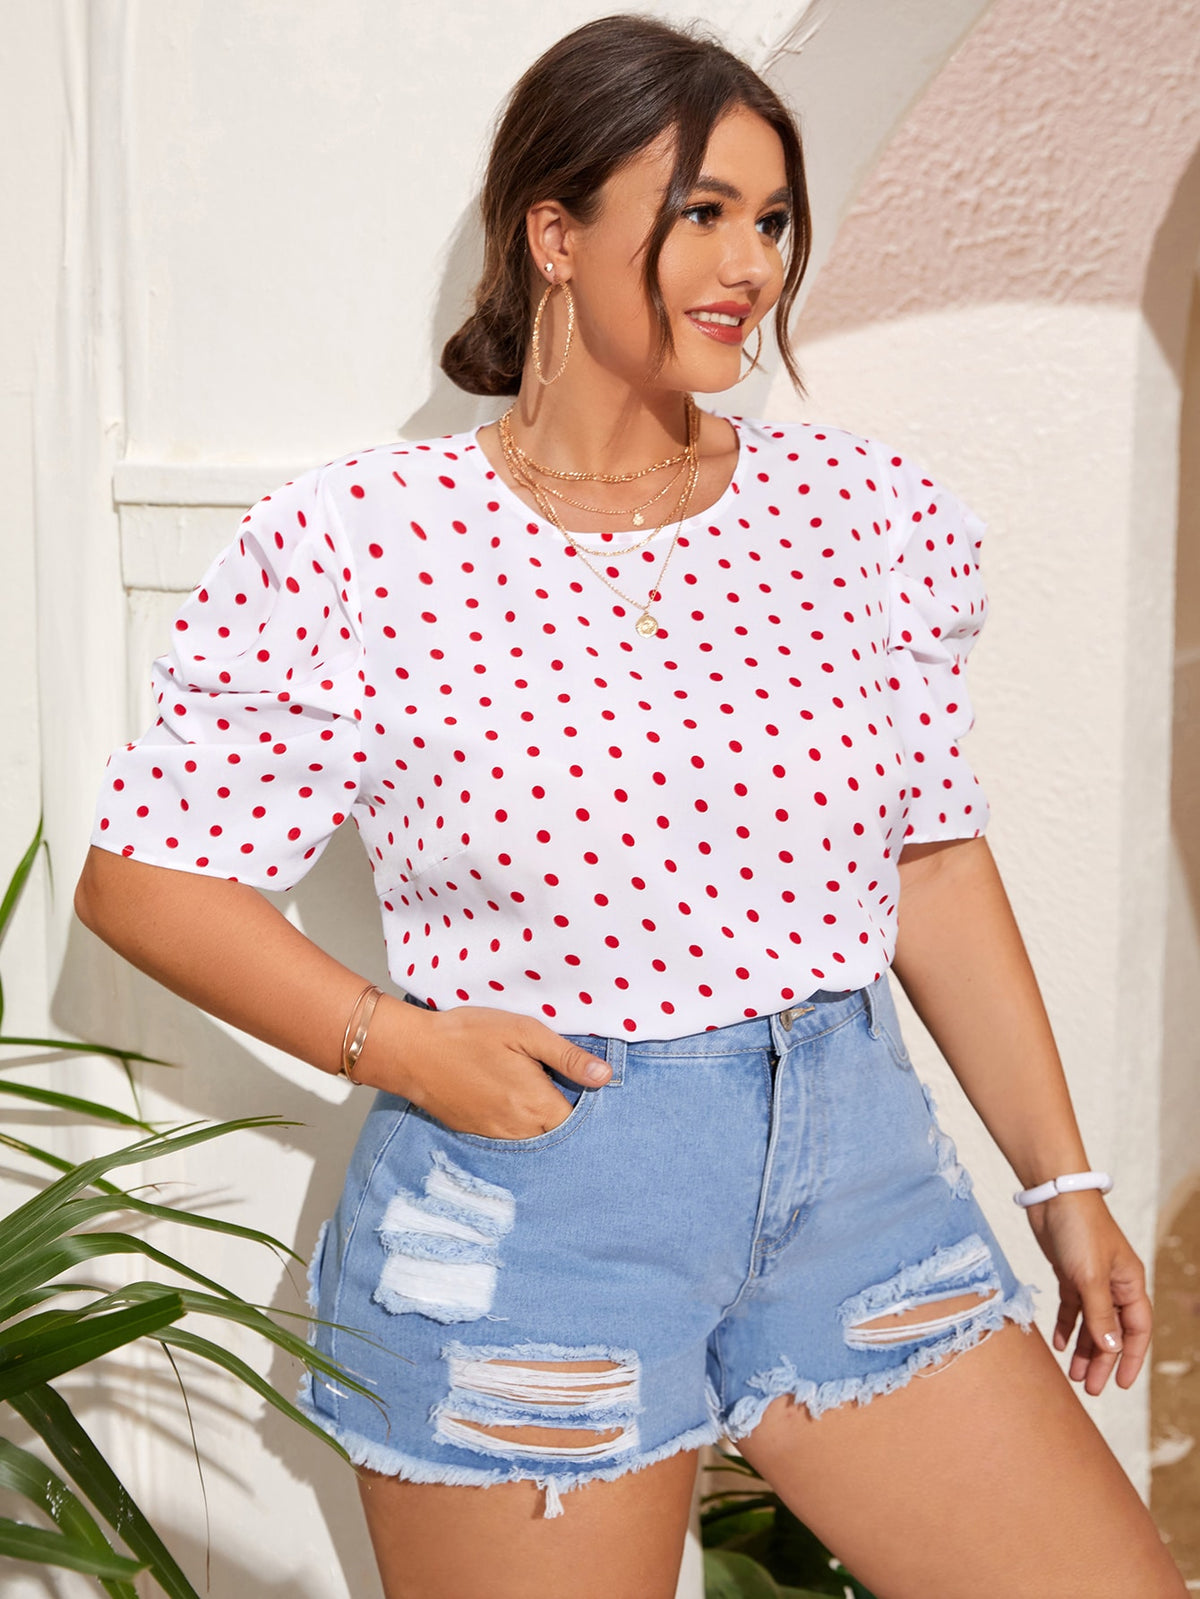 Plus Polka Dot Blouse - Red and White / 4XL